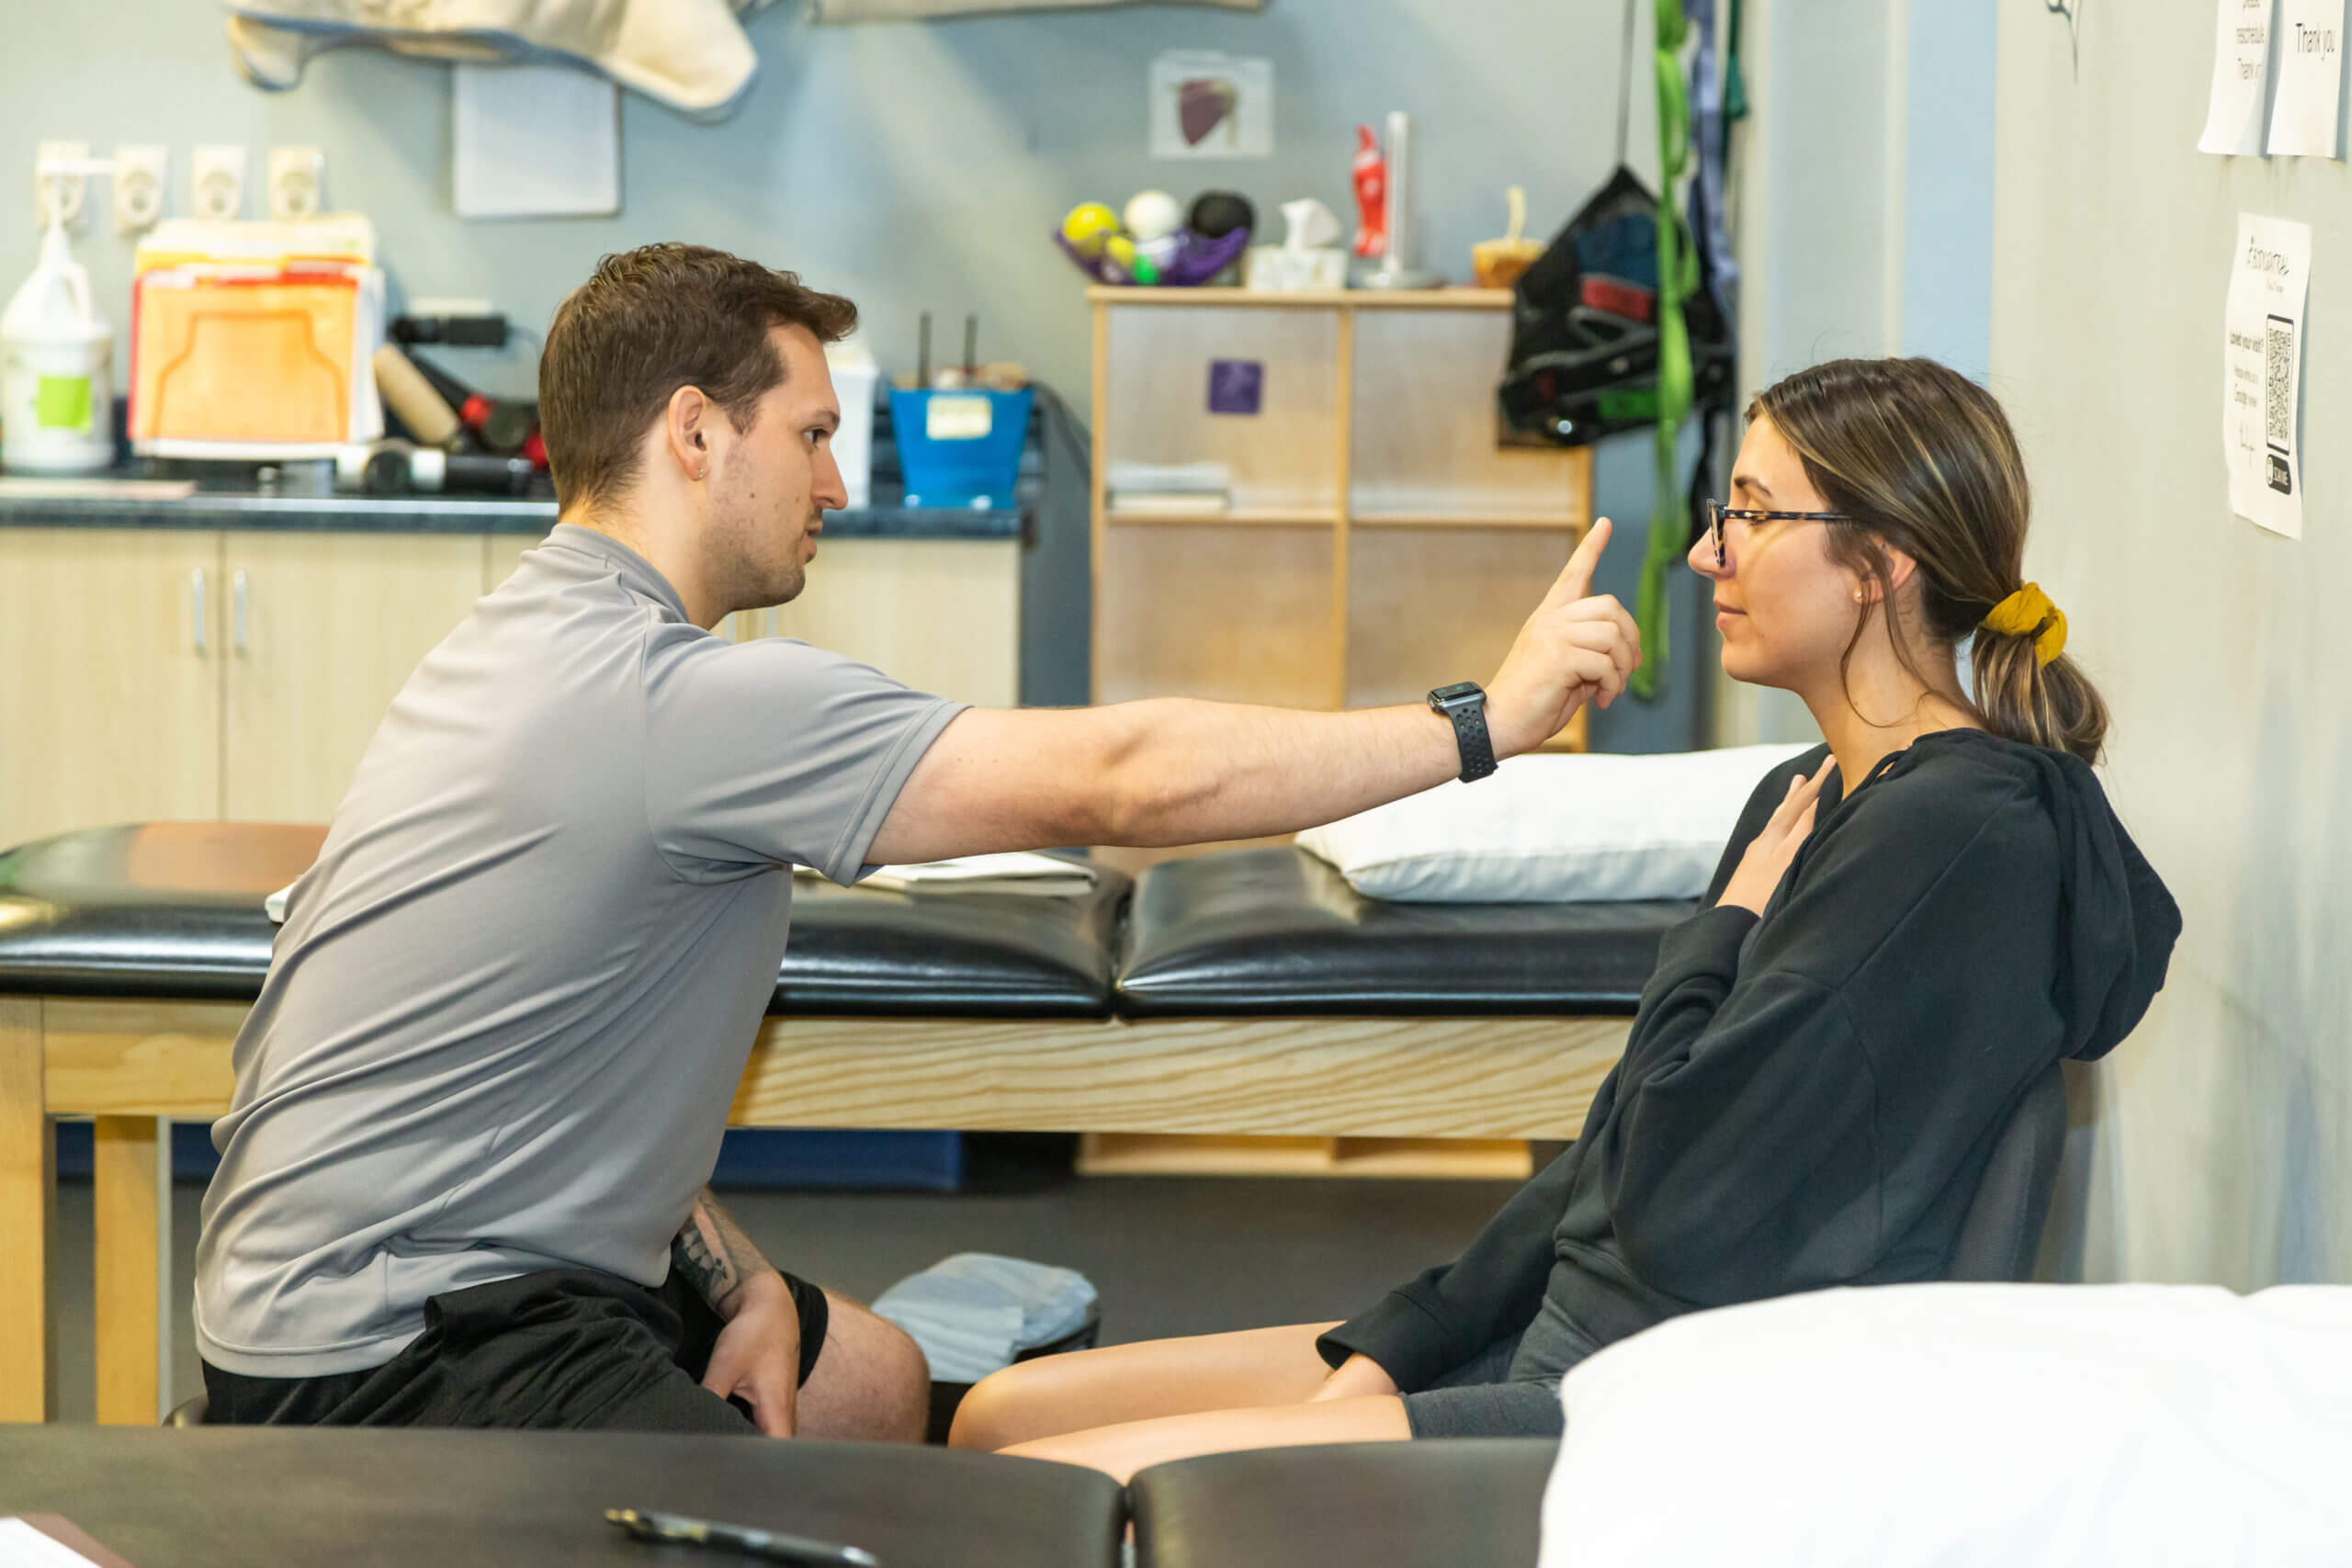 Bodycentral Physical Therapy  Tucson, Tempe & Mesa Physical Therapy